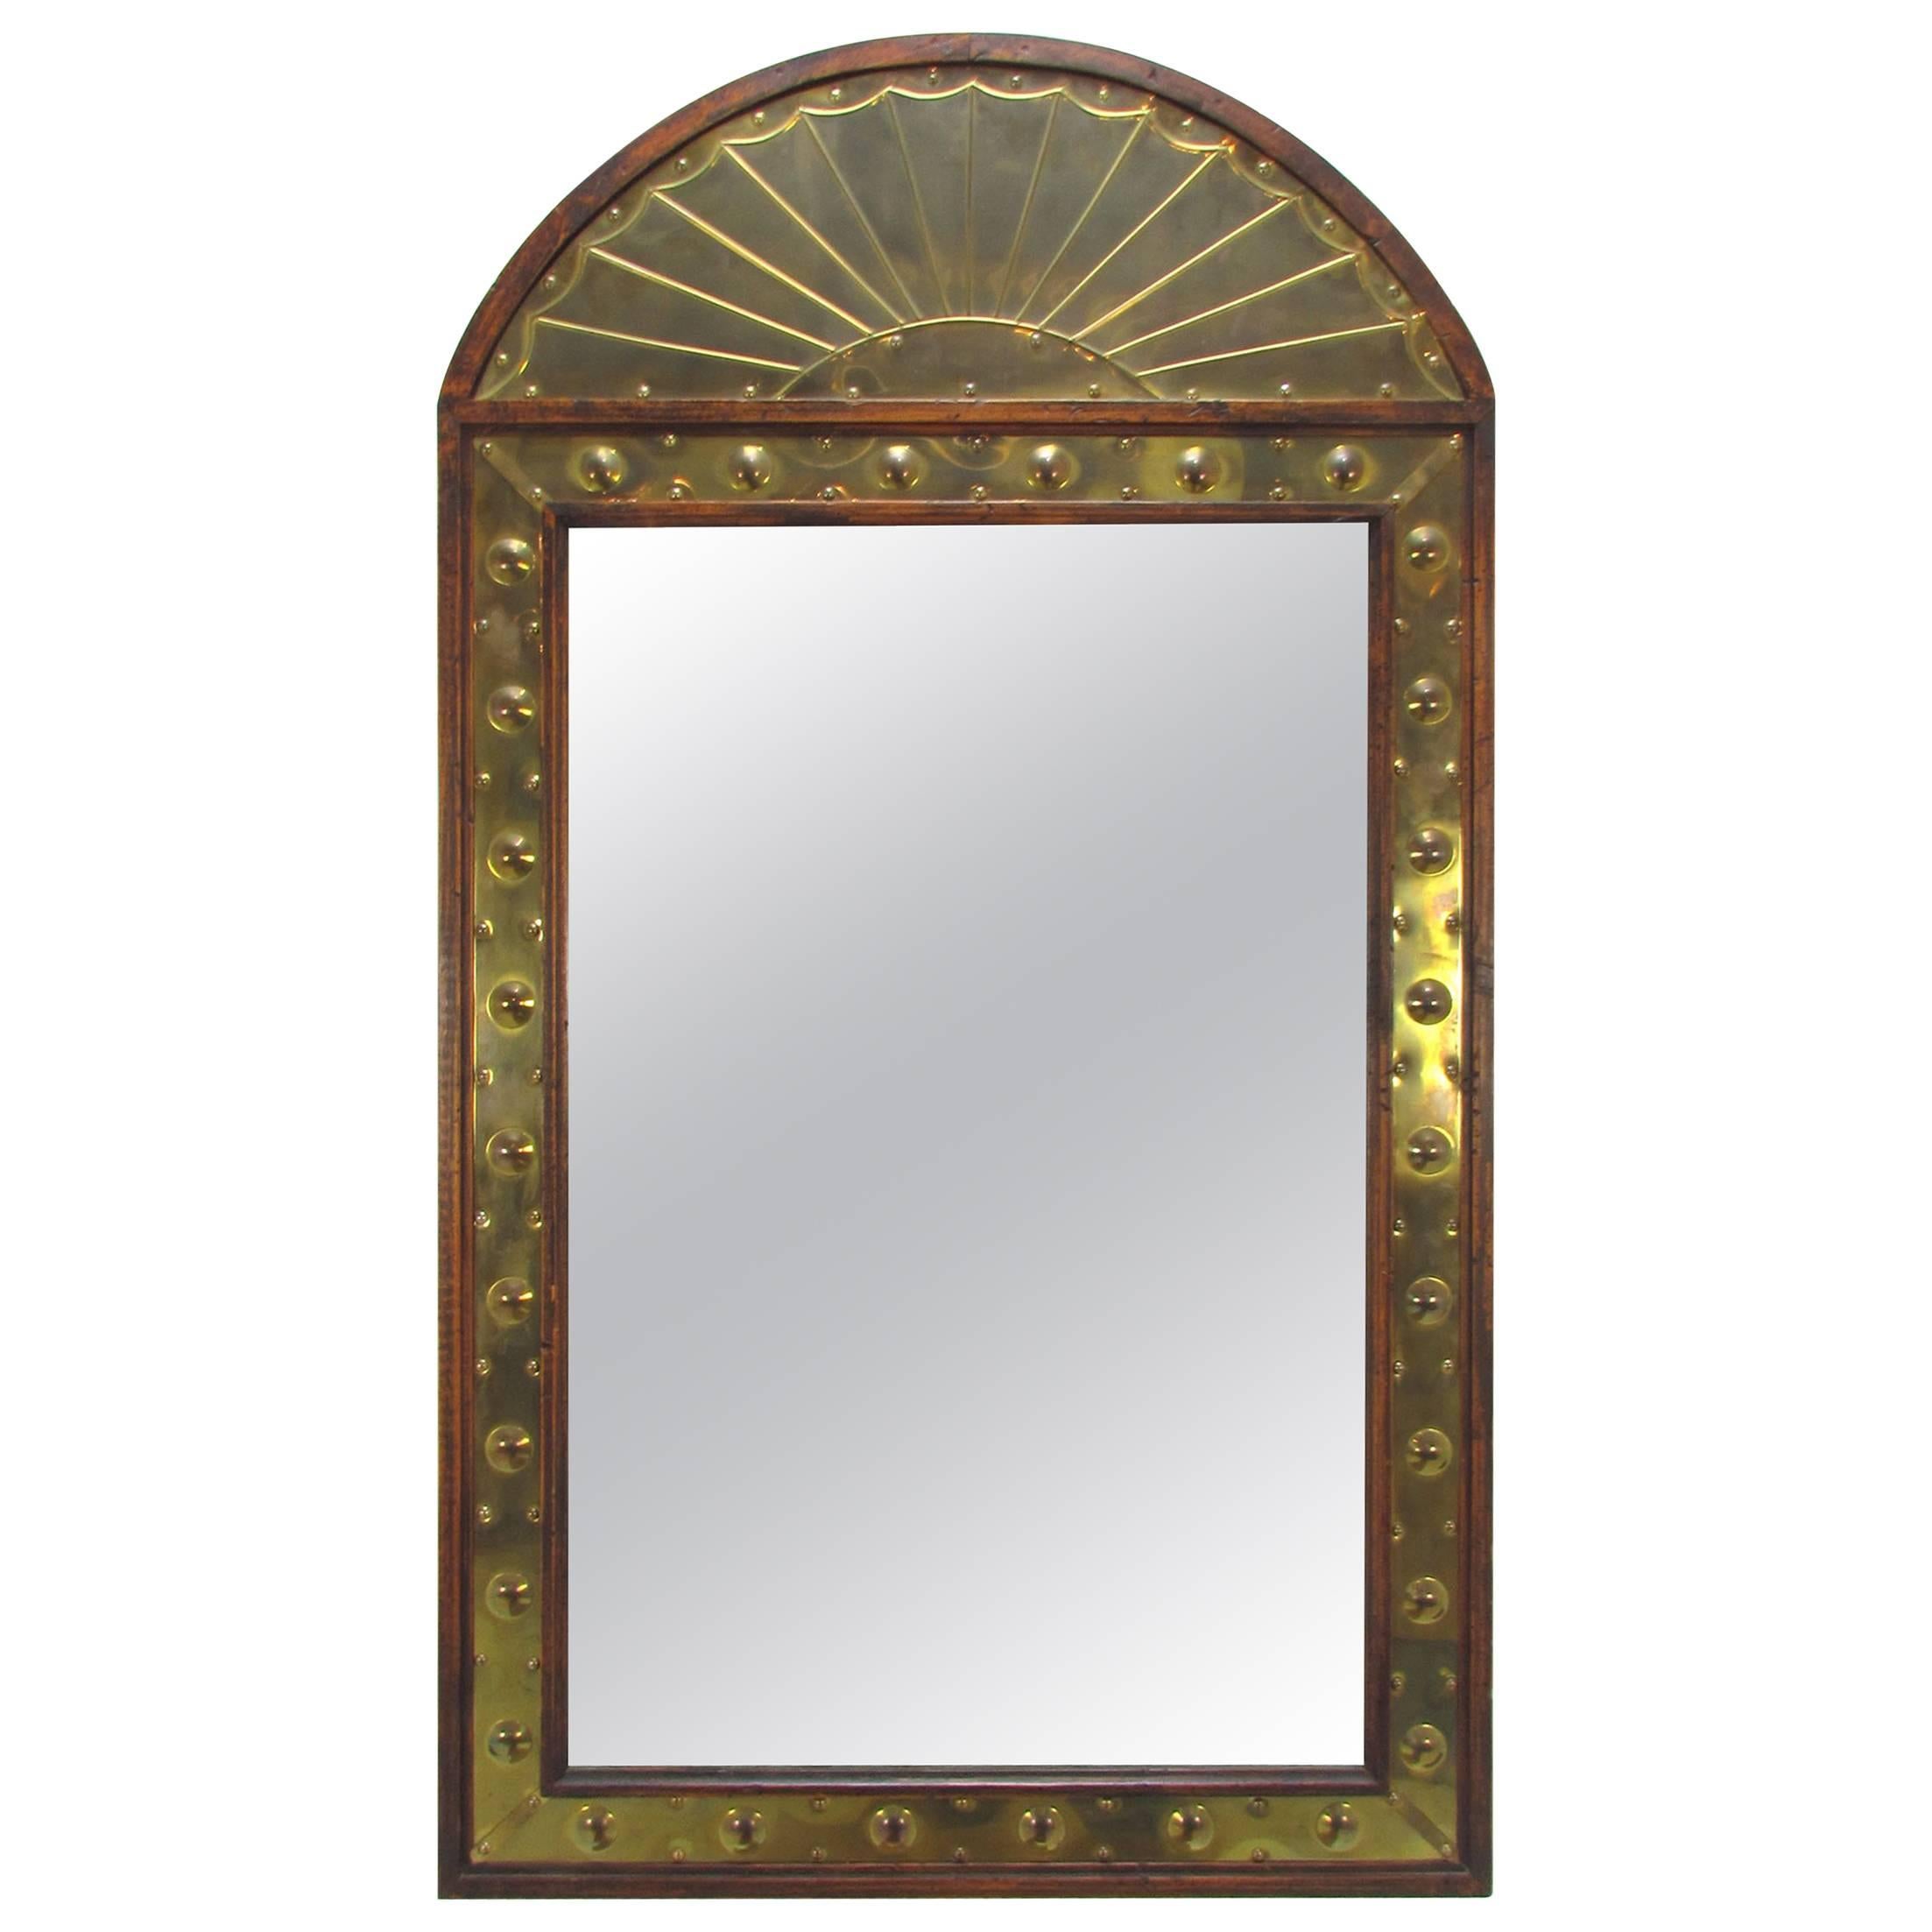 Sarreid Wall Mirror in Brass Repoussé and Wood, Made in Italy